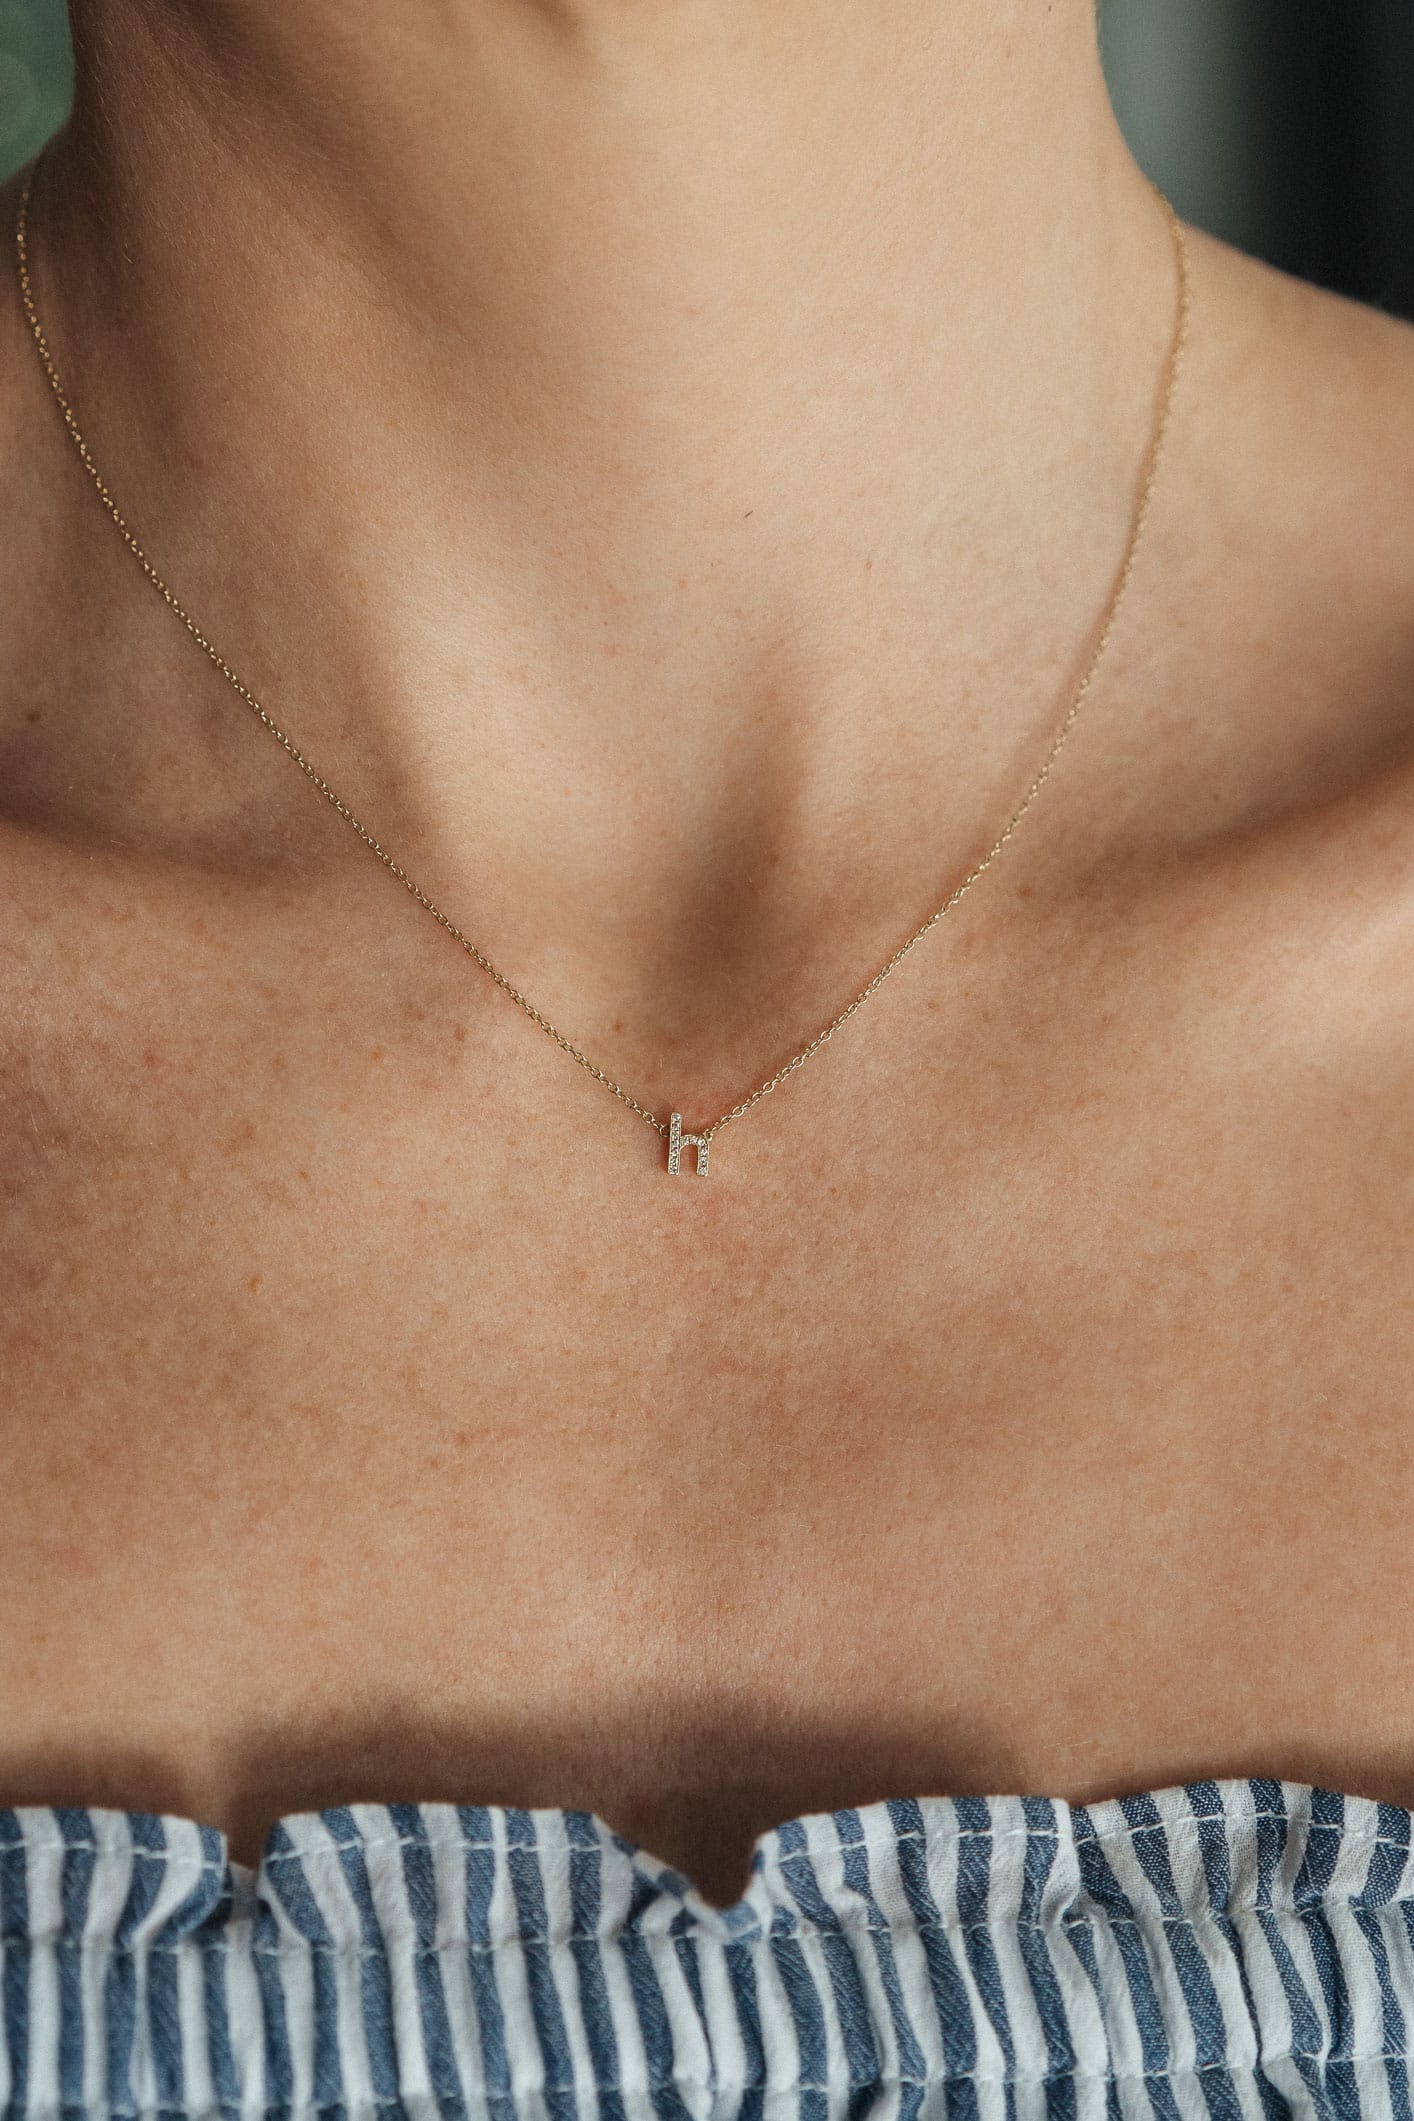 Louise Roe of Front Roe chooses her top initial necklaces